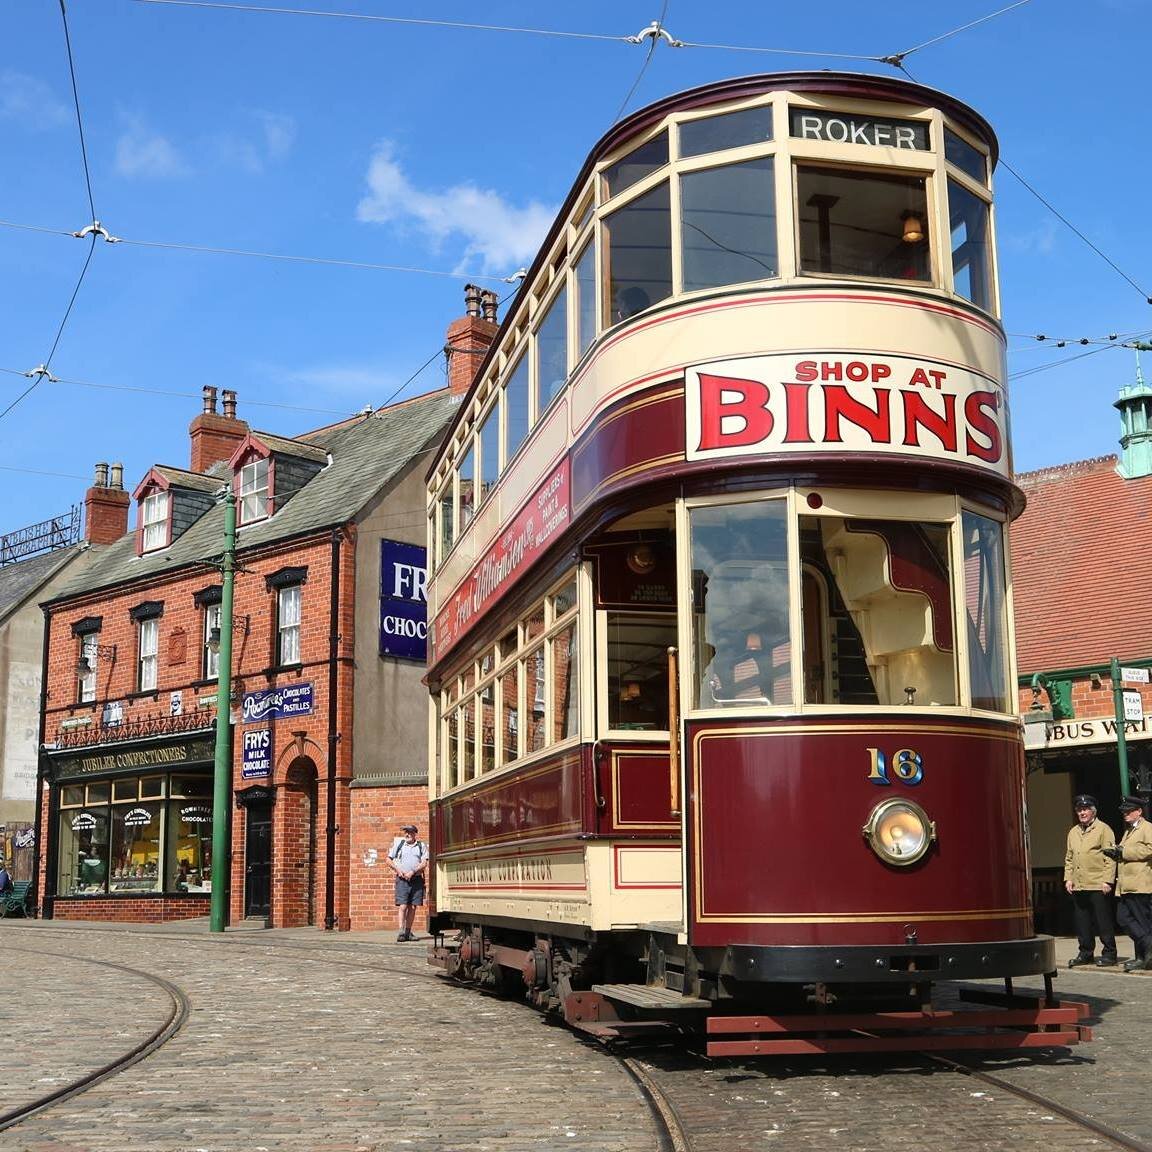 Beamish - The Living Museum of the North - Newcastle, UK